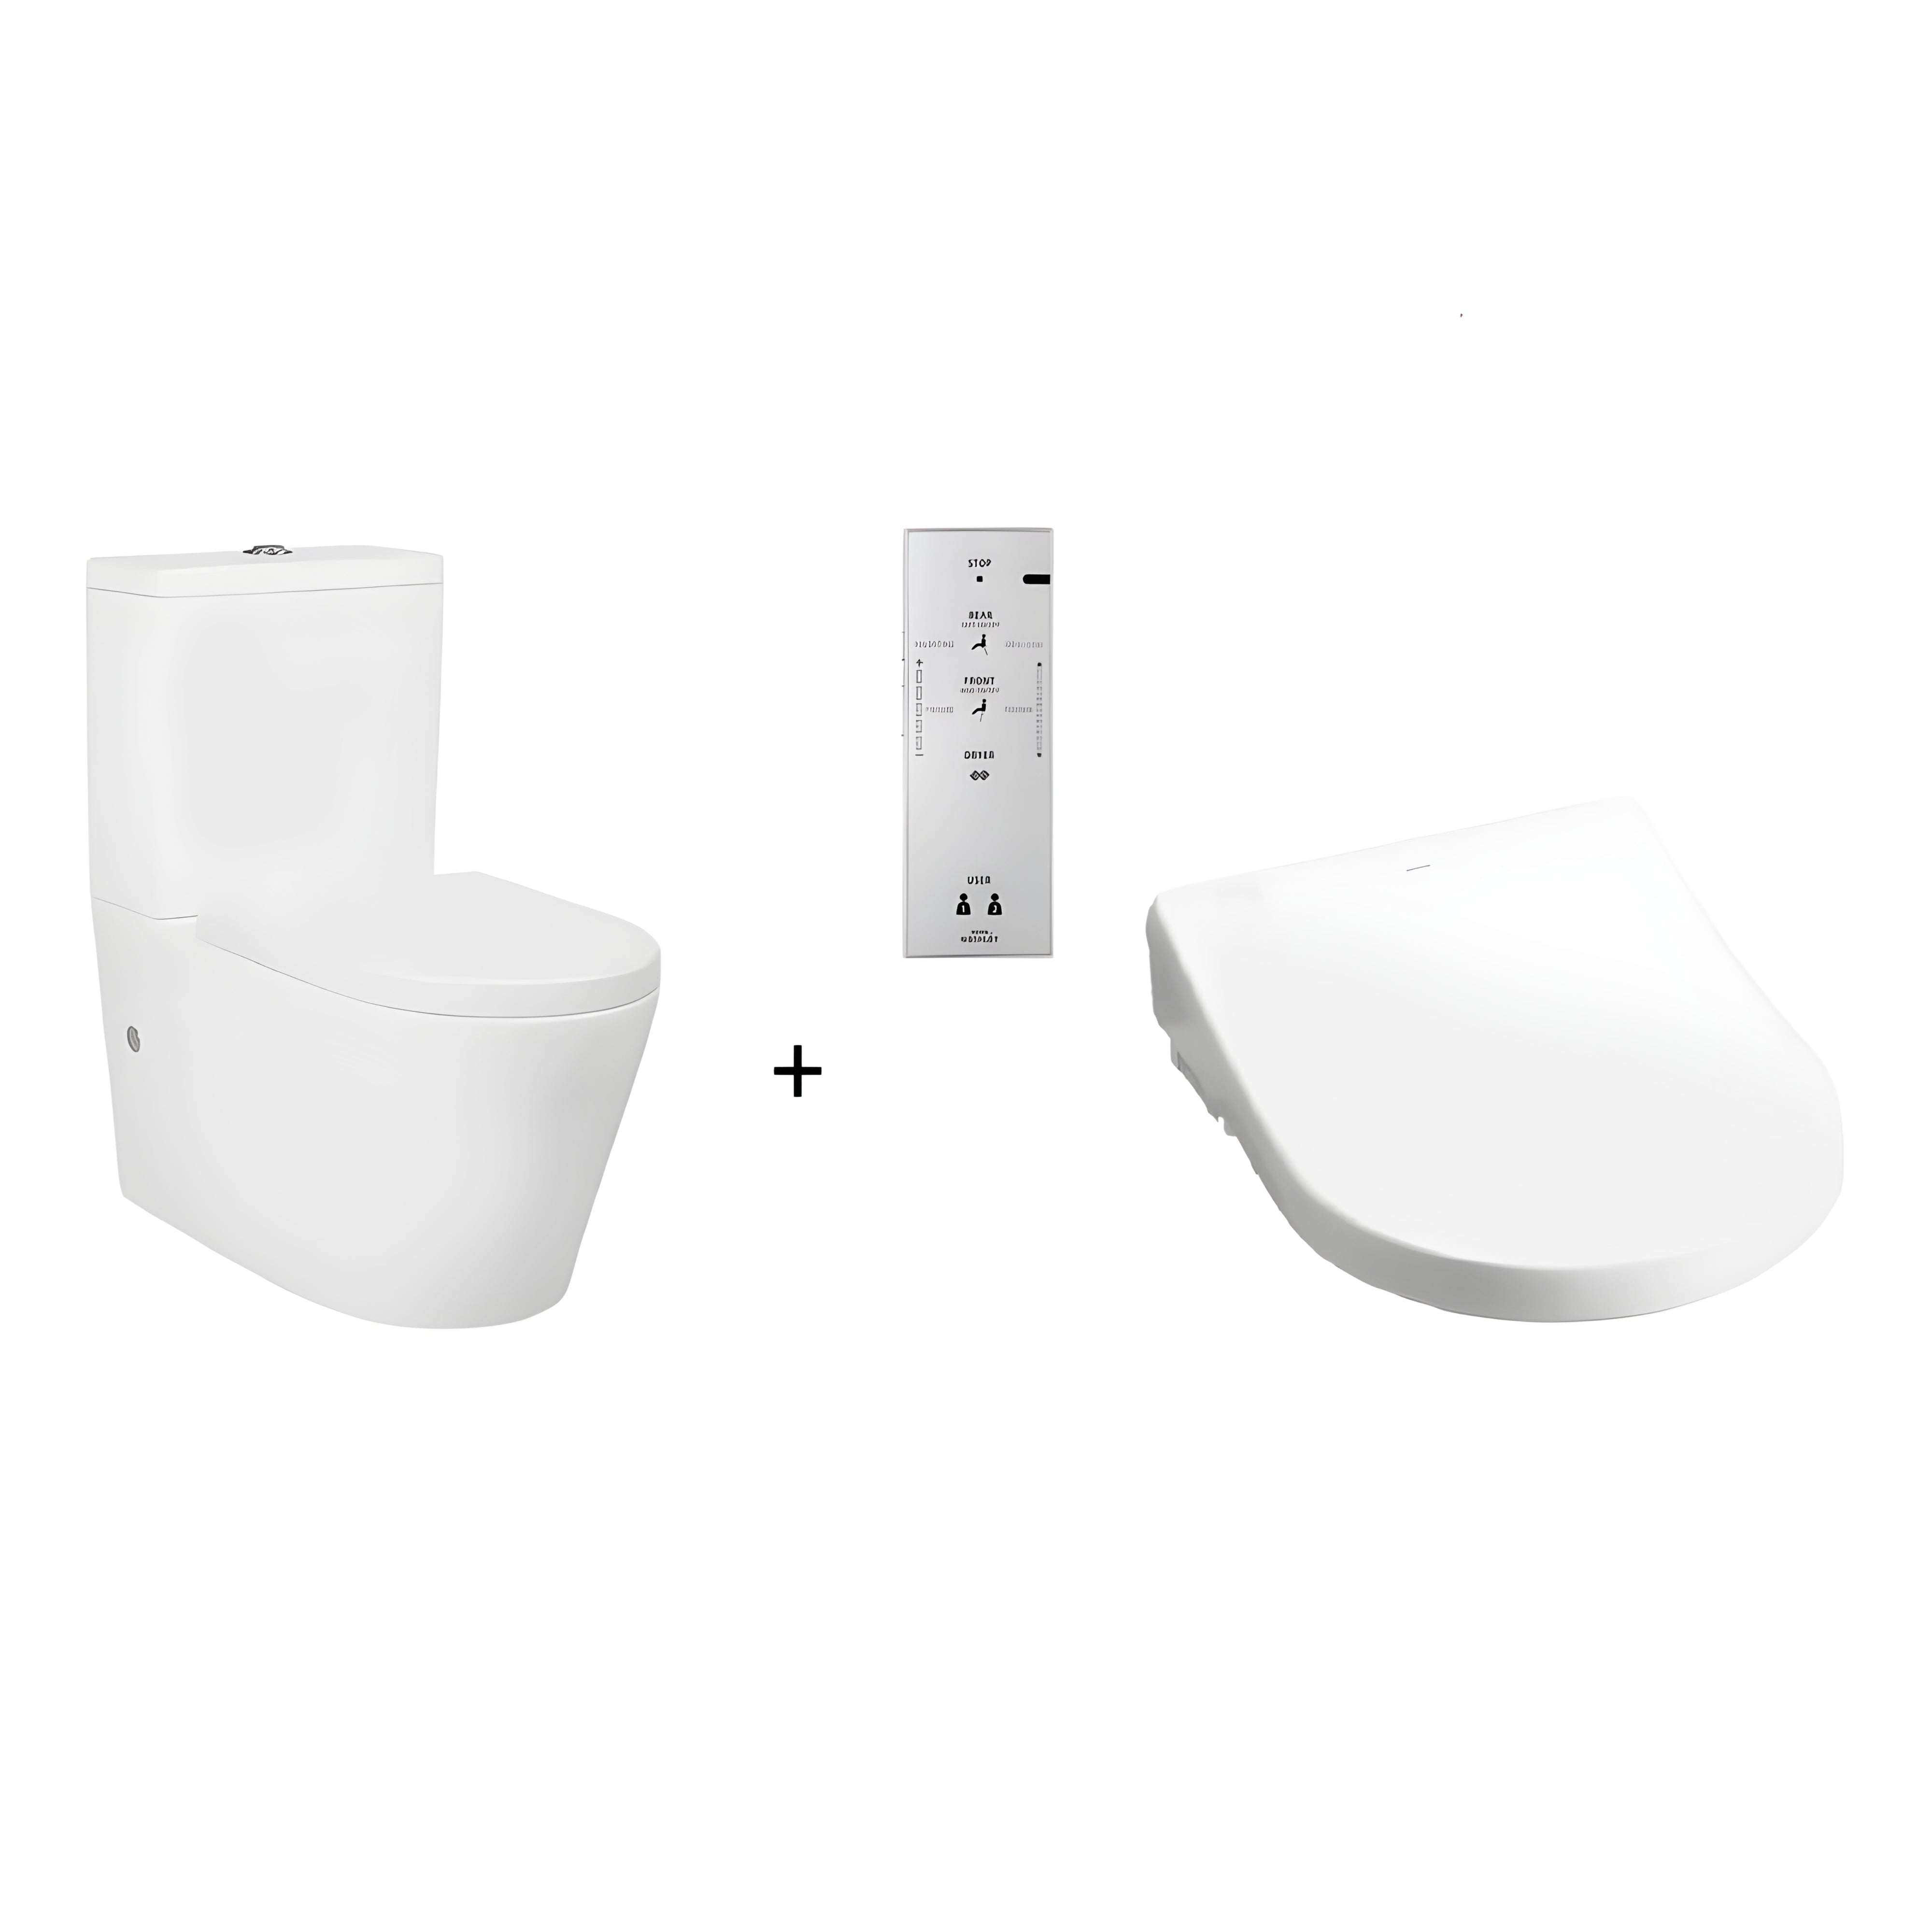 TOTO WASHLET W/ REMOTE CONTROL AND AUTOLID RIMLESS BTW TOILET SUITE PACKAGE D-SHAPE GLOSS WHITE